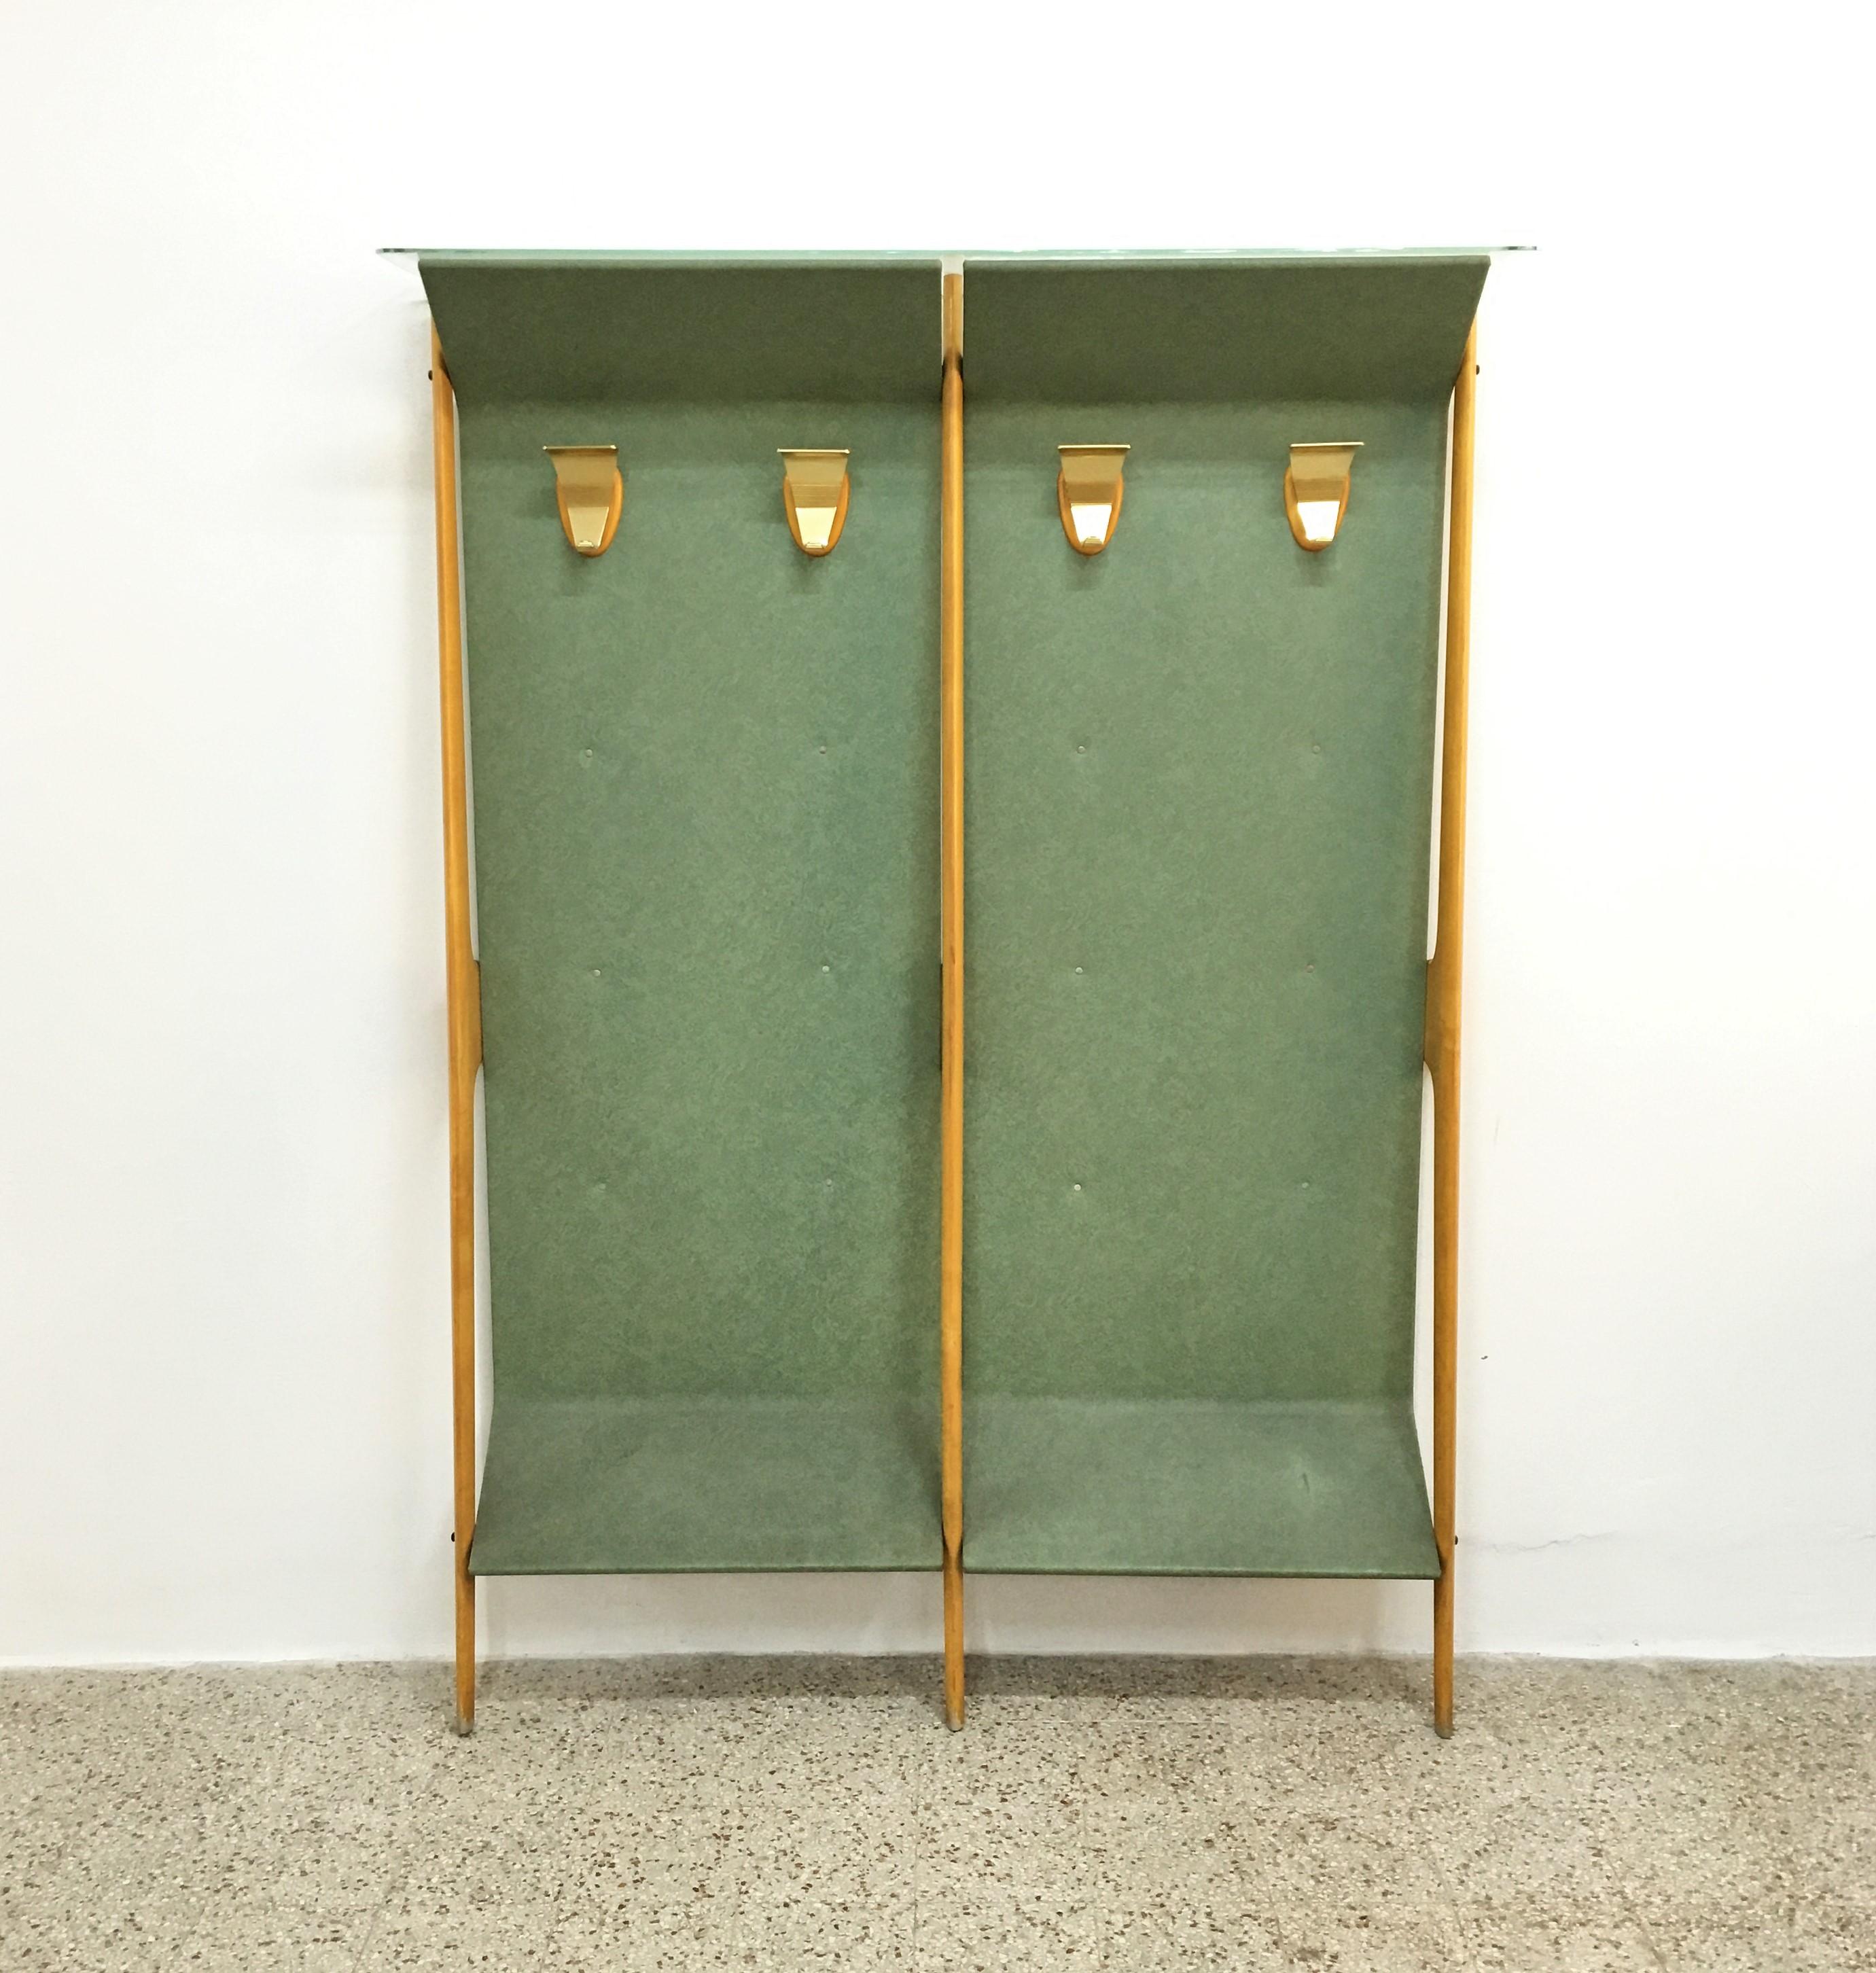 Original and beautiful wall hanger, with geometric shapes in light wood with panel covered in green skai, with golden metal elements, and glass shelf - hatbox on the top.
In the style of Ico Parisi, Cantù production in the 1950s, Italy.
Good